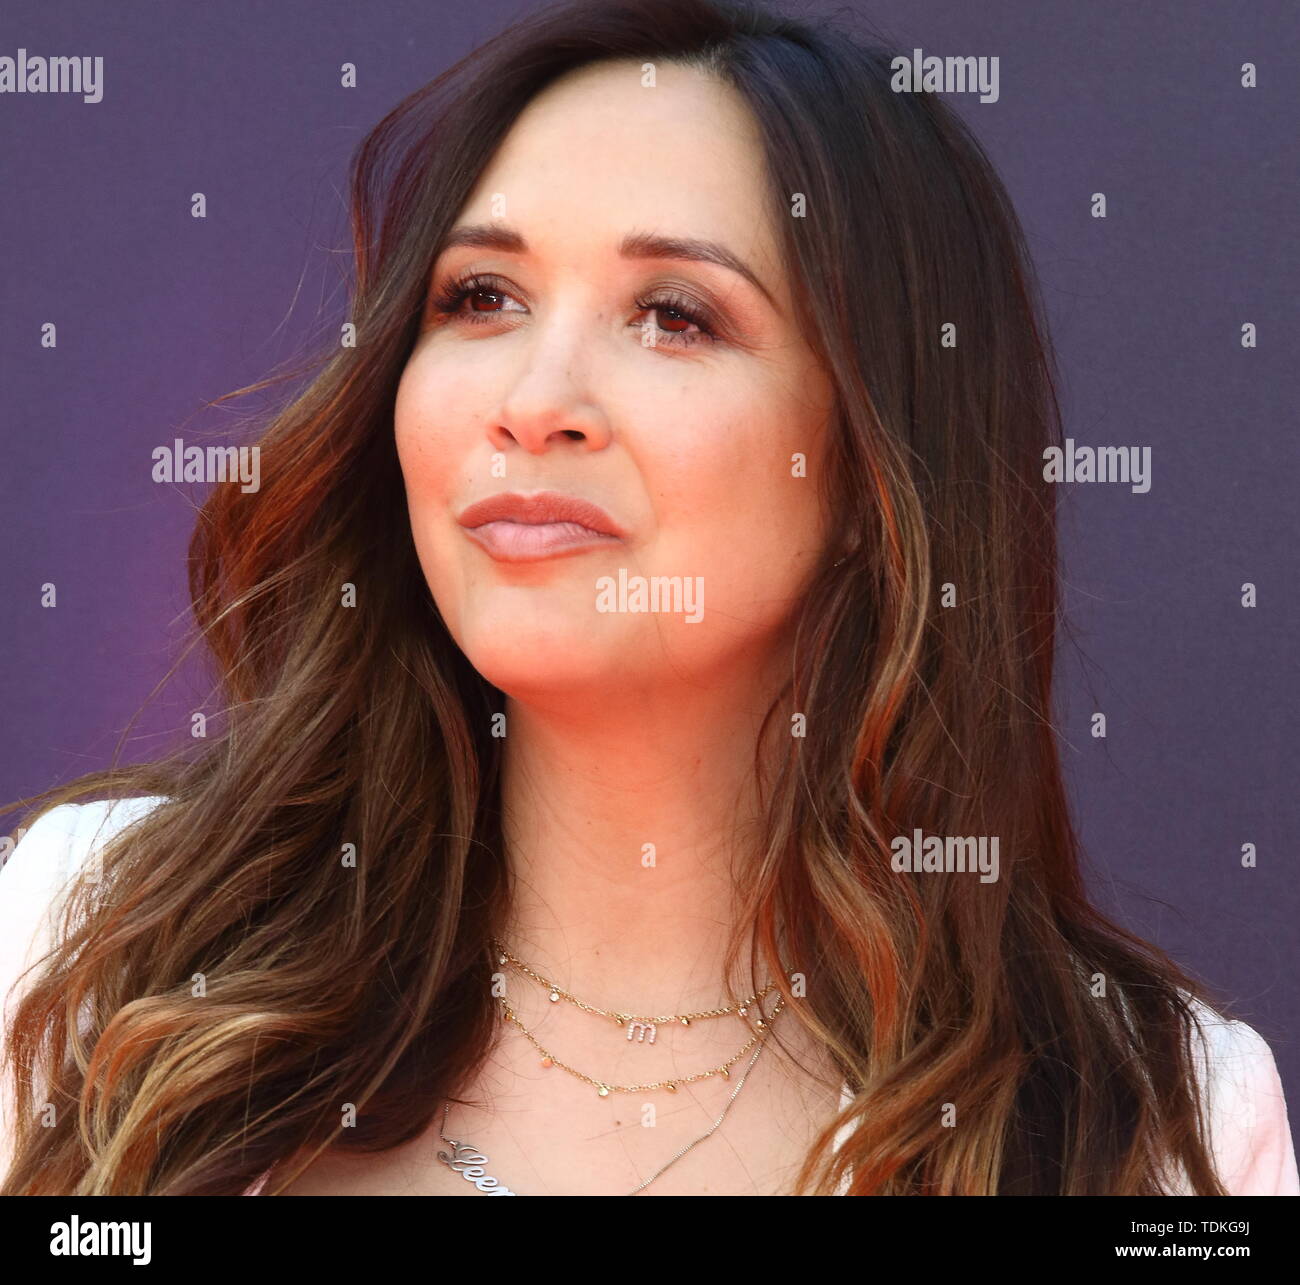 London, UK. 16th June, 2019. Myleene Klass attends the European Premiere of Toy Story 4 at Odeon Luxe, Leicester Square in London. Credit: SOPA Images Limited/Alamy Live News Stock Photo